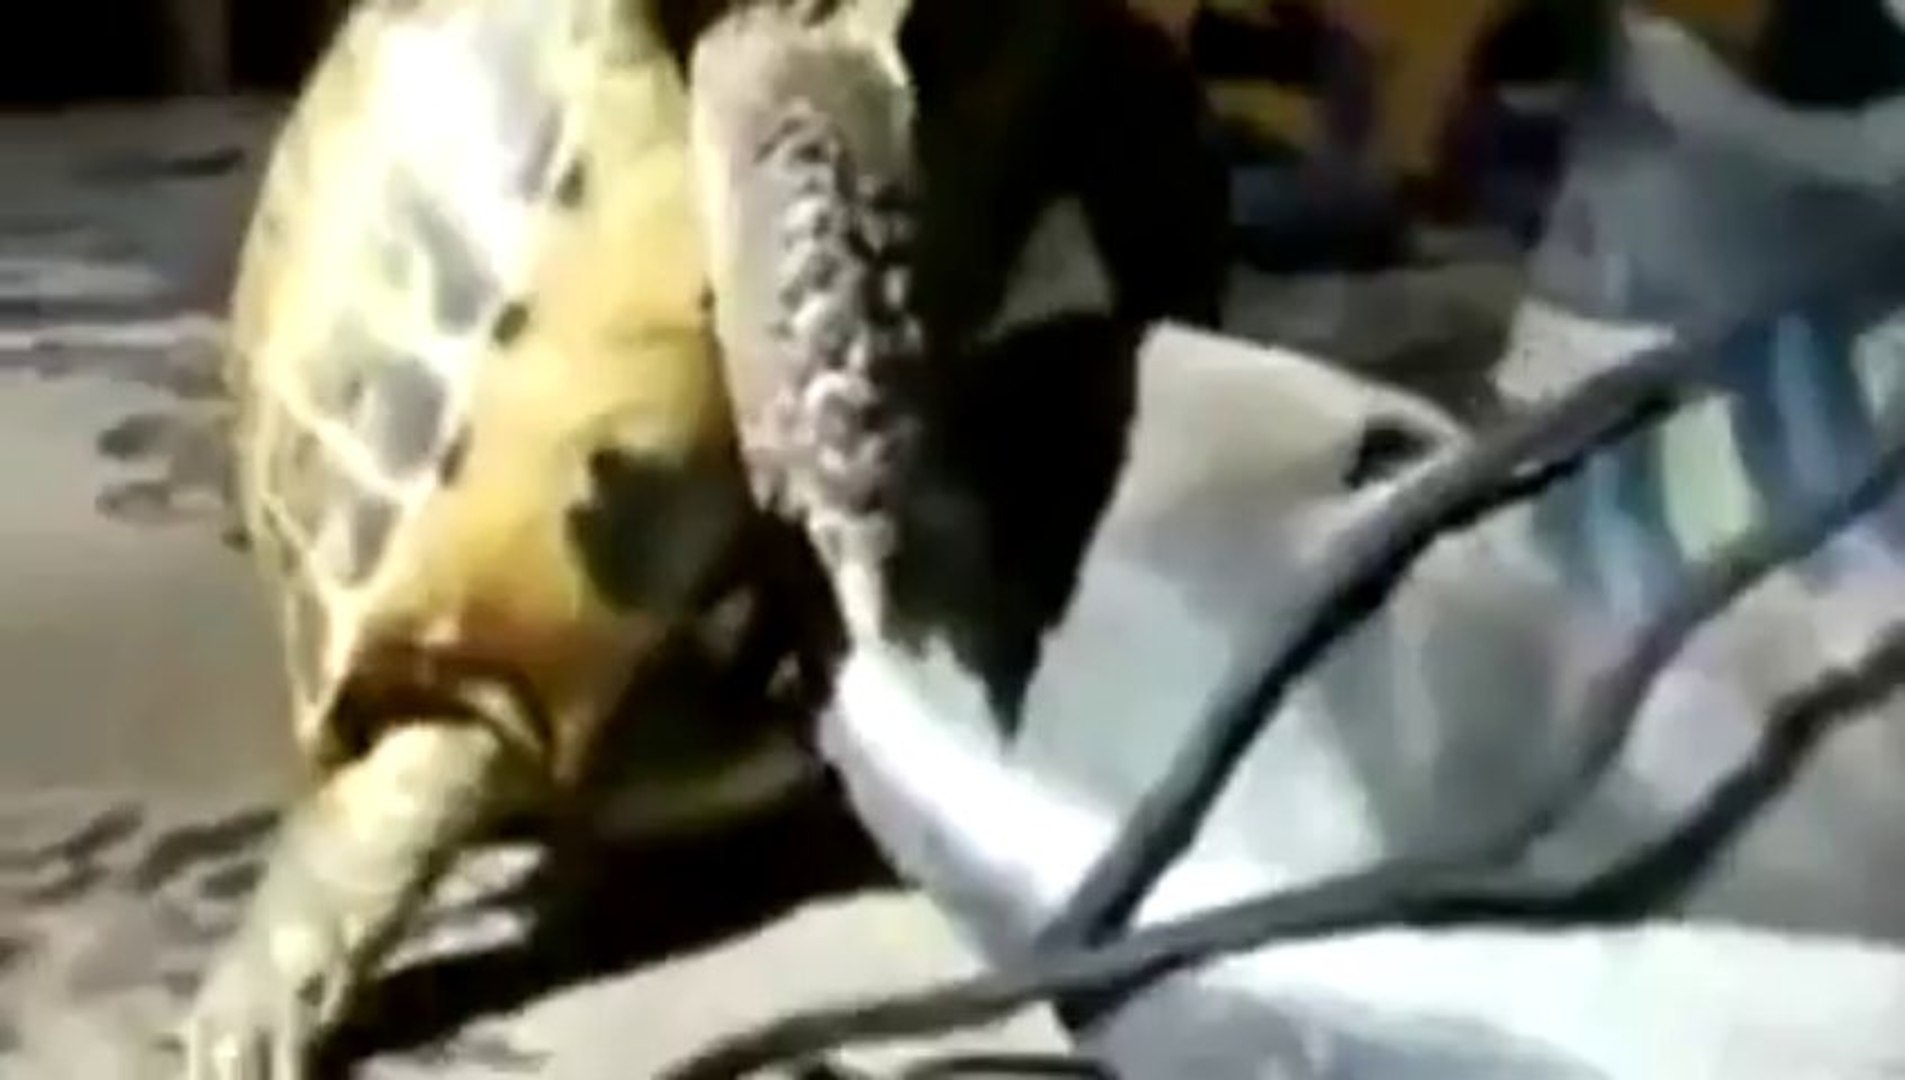 Turtle Has Sex With Shoe